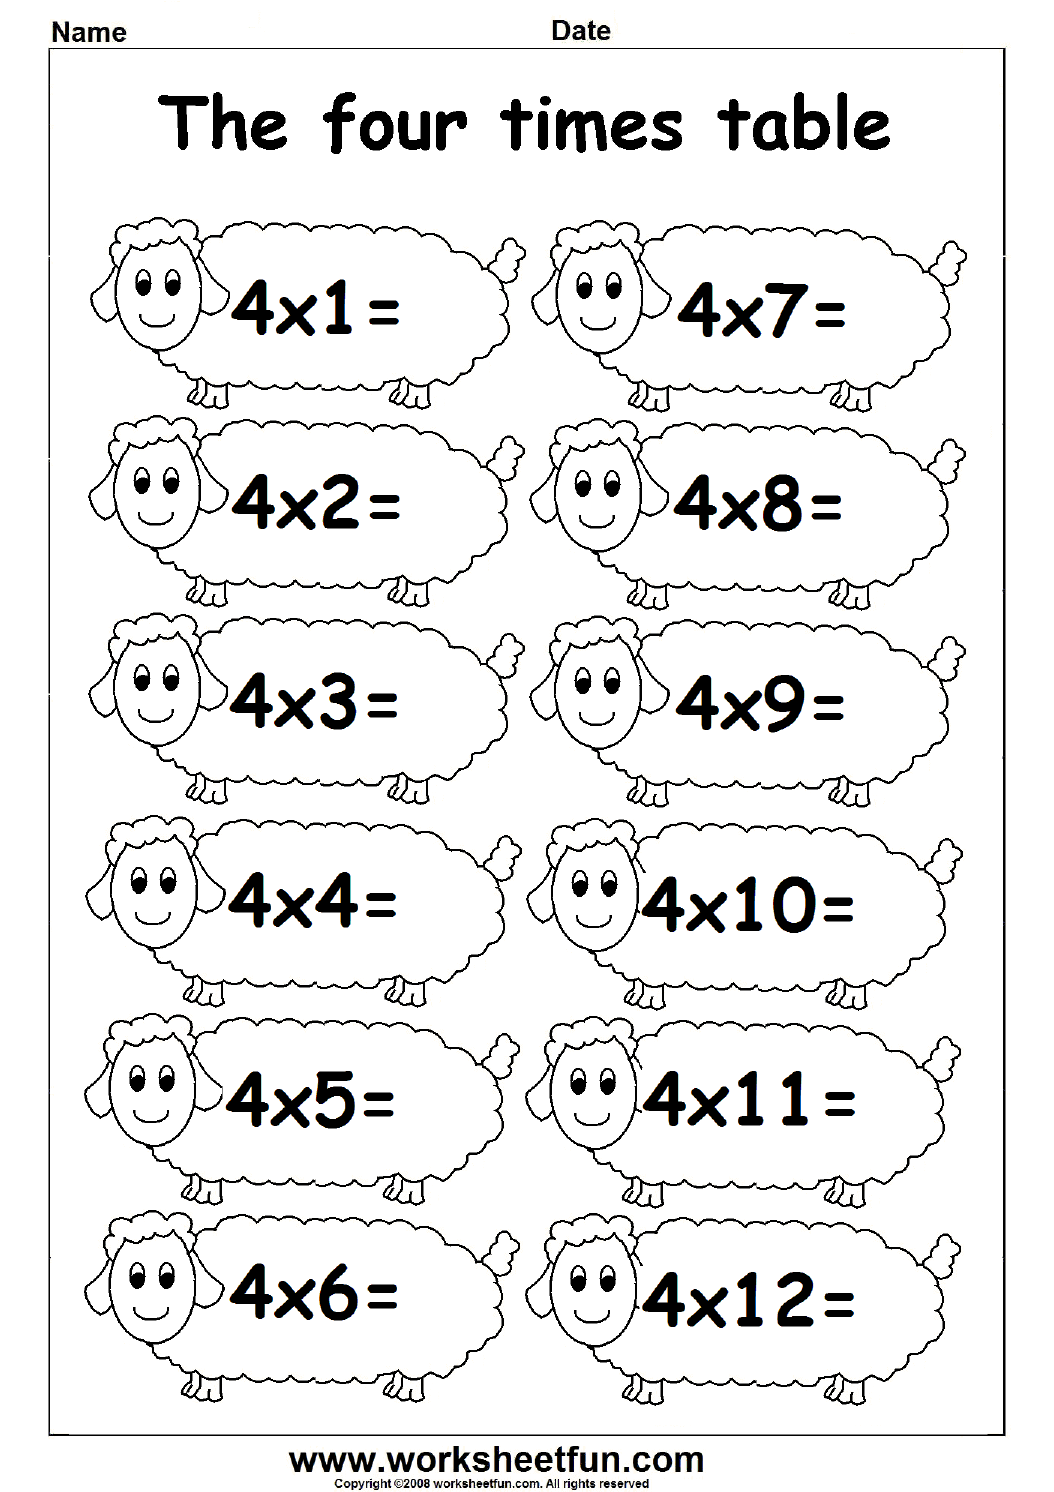 Multiplication Times Tables Worksheets 2 3 4 Times Tables Three Worksheets Times Tables Worksheets Multiplication Worksheets Multiplication Times Tables